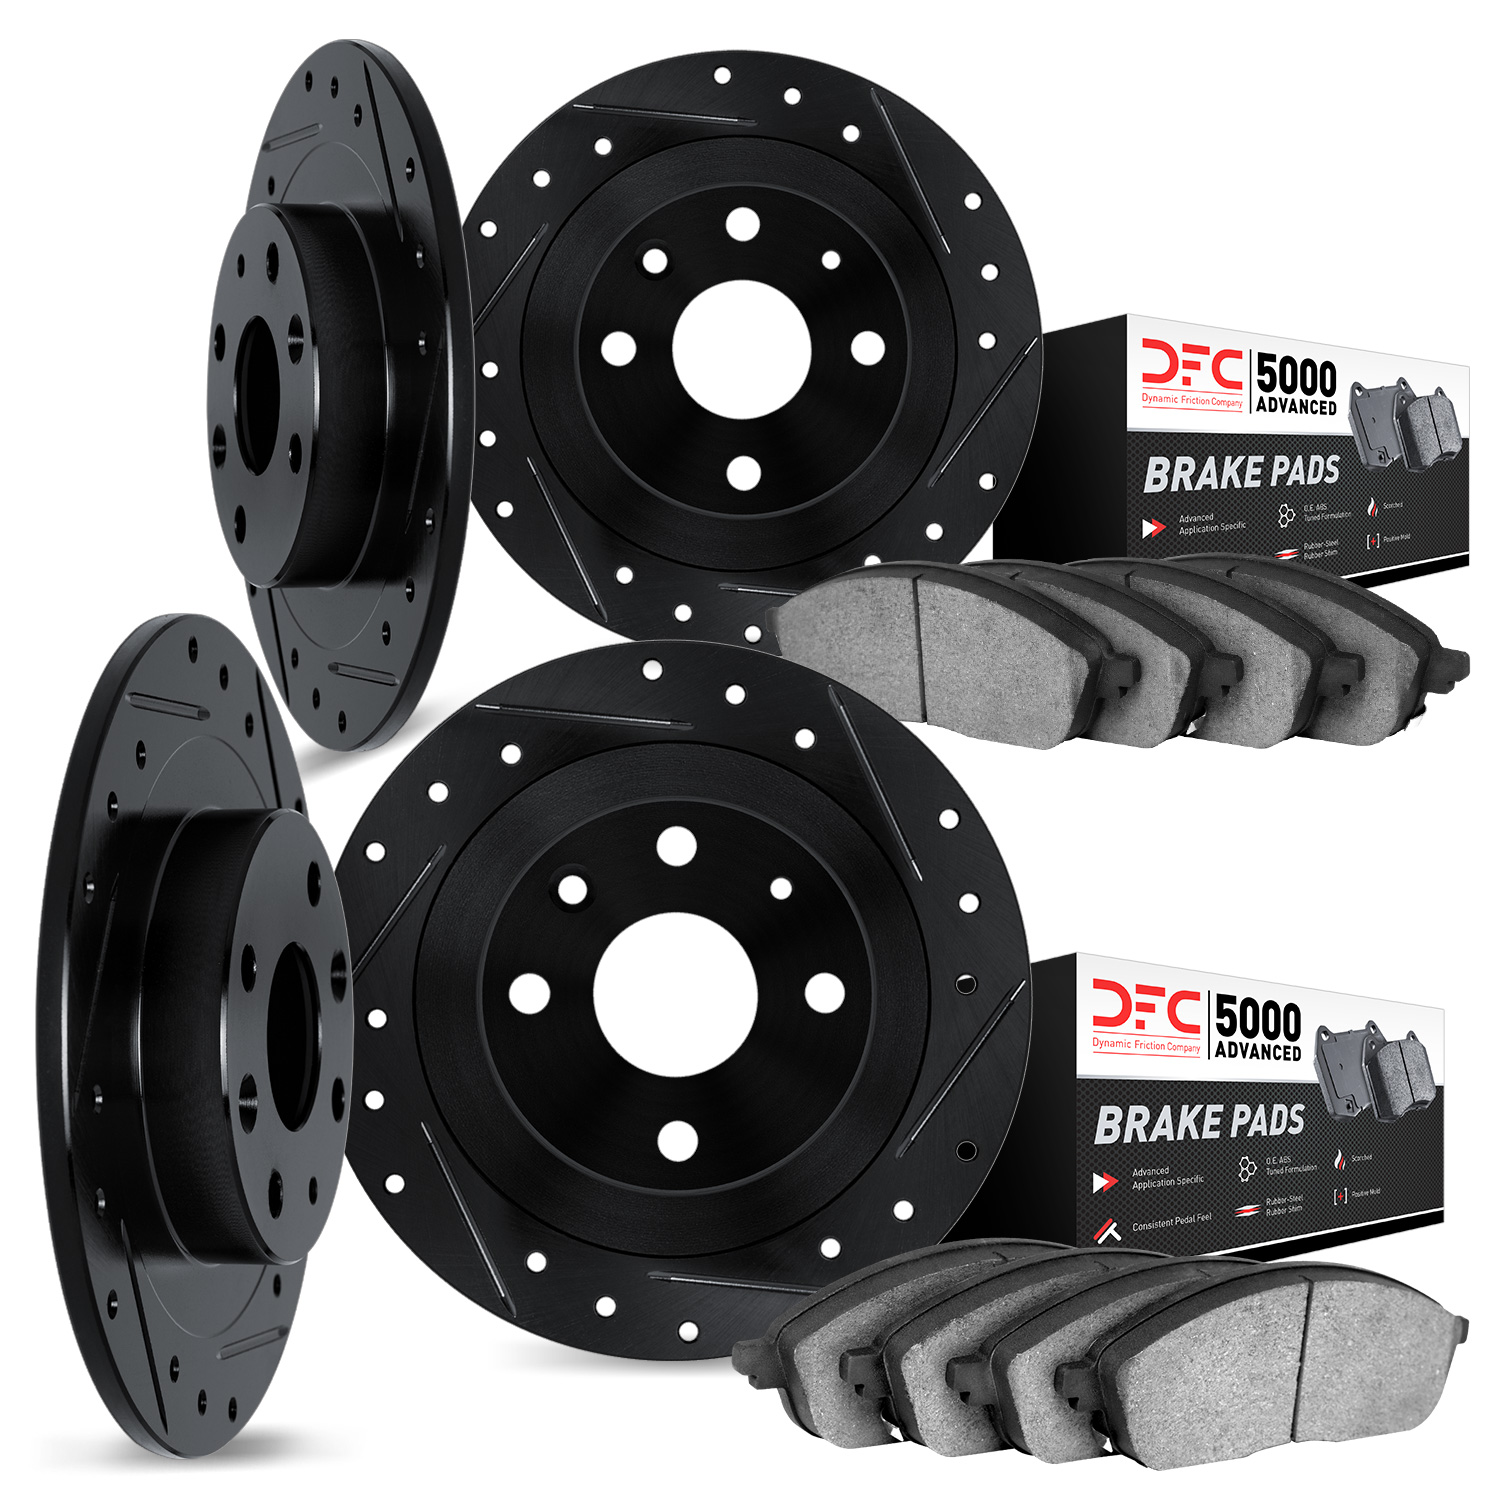 8504-28001 Drilled/Slotted Brake Rotors w/5000 Advanced Brake Pads Kit [Black], 1980-1989 Peugeot, Position: Front and Rear